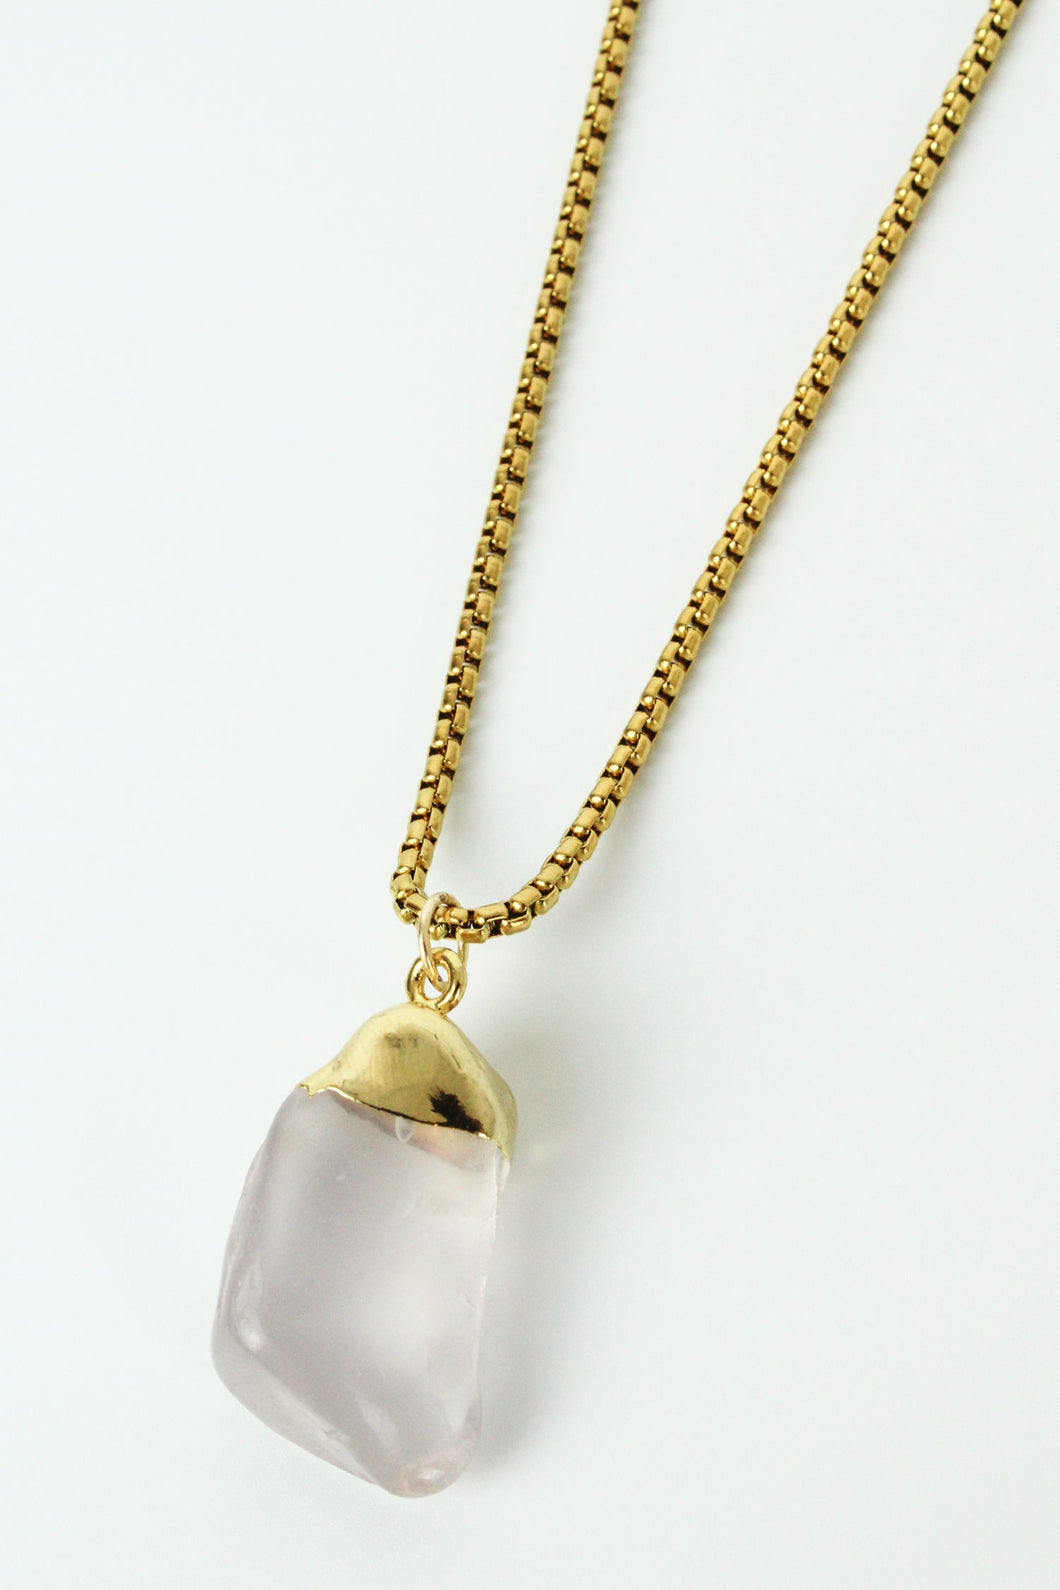 Rose quartz gem encased in gold with a gold chain necklace